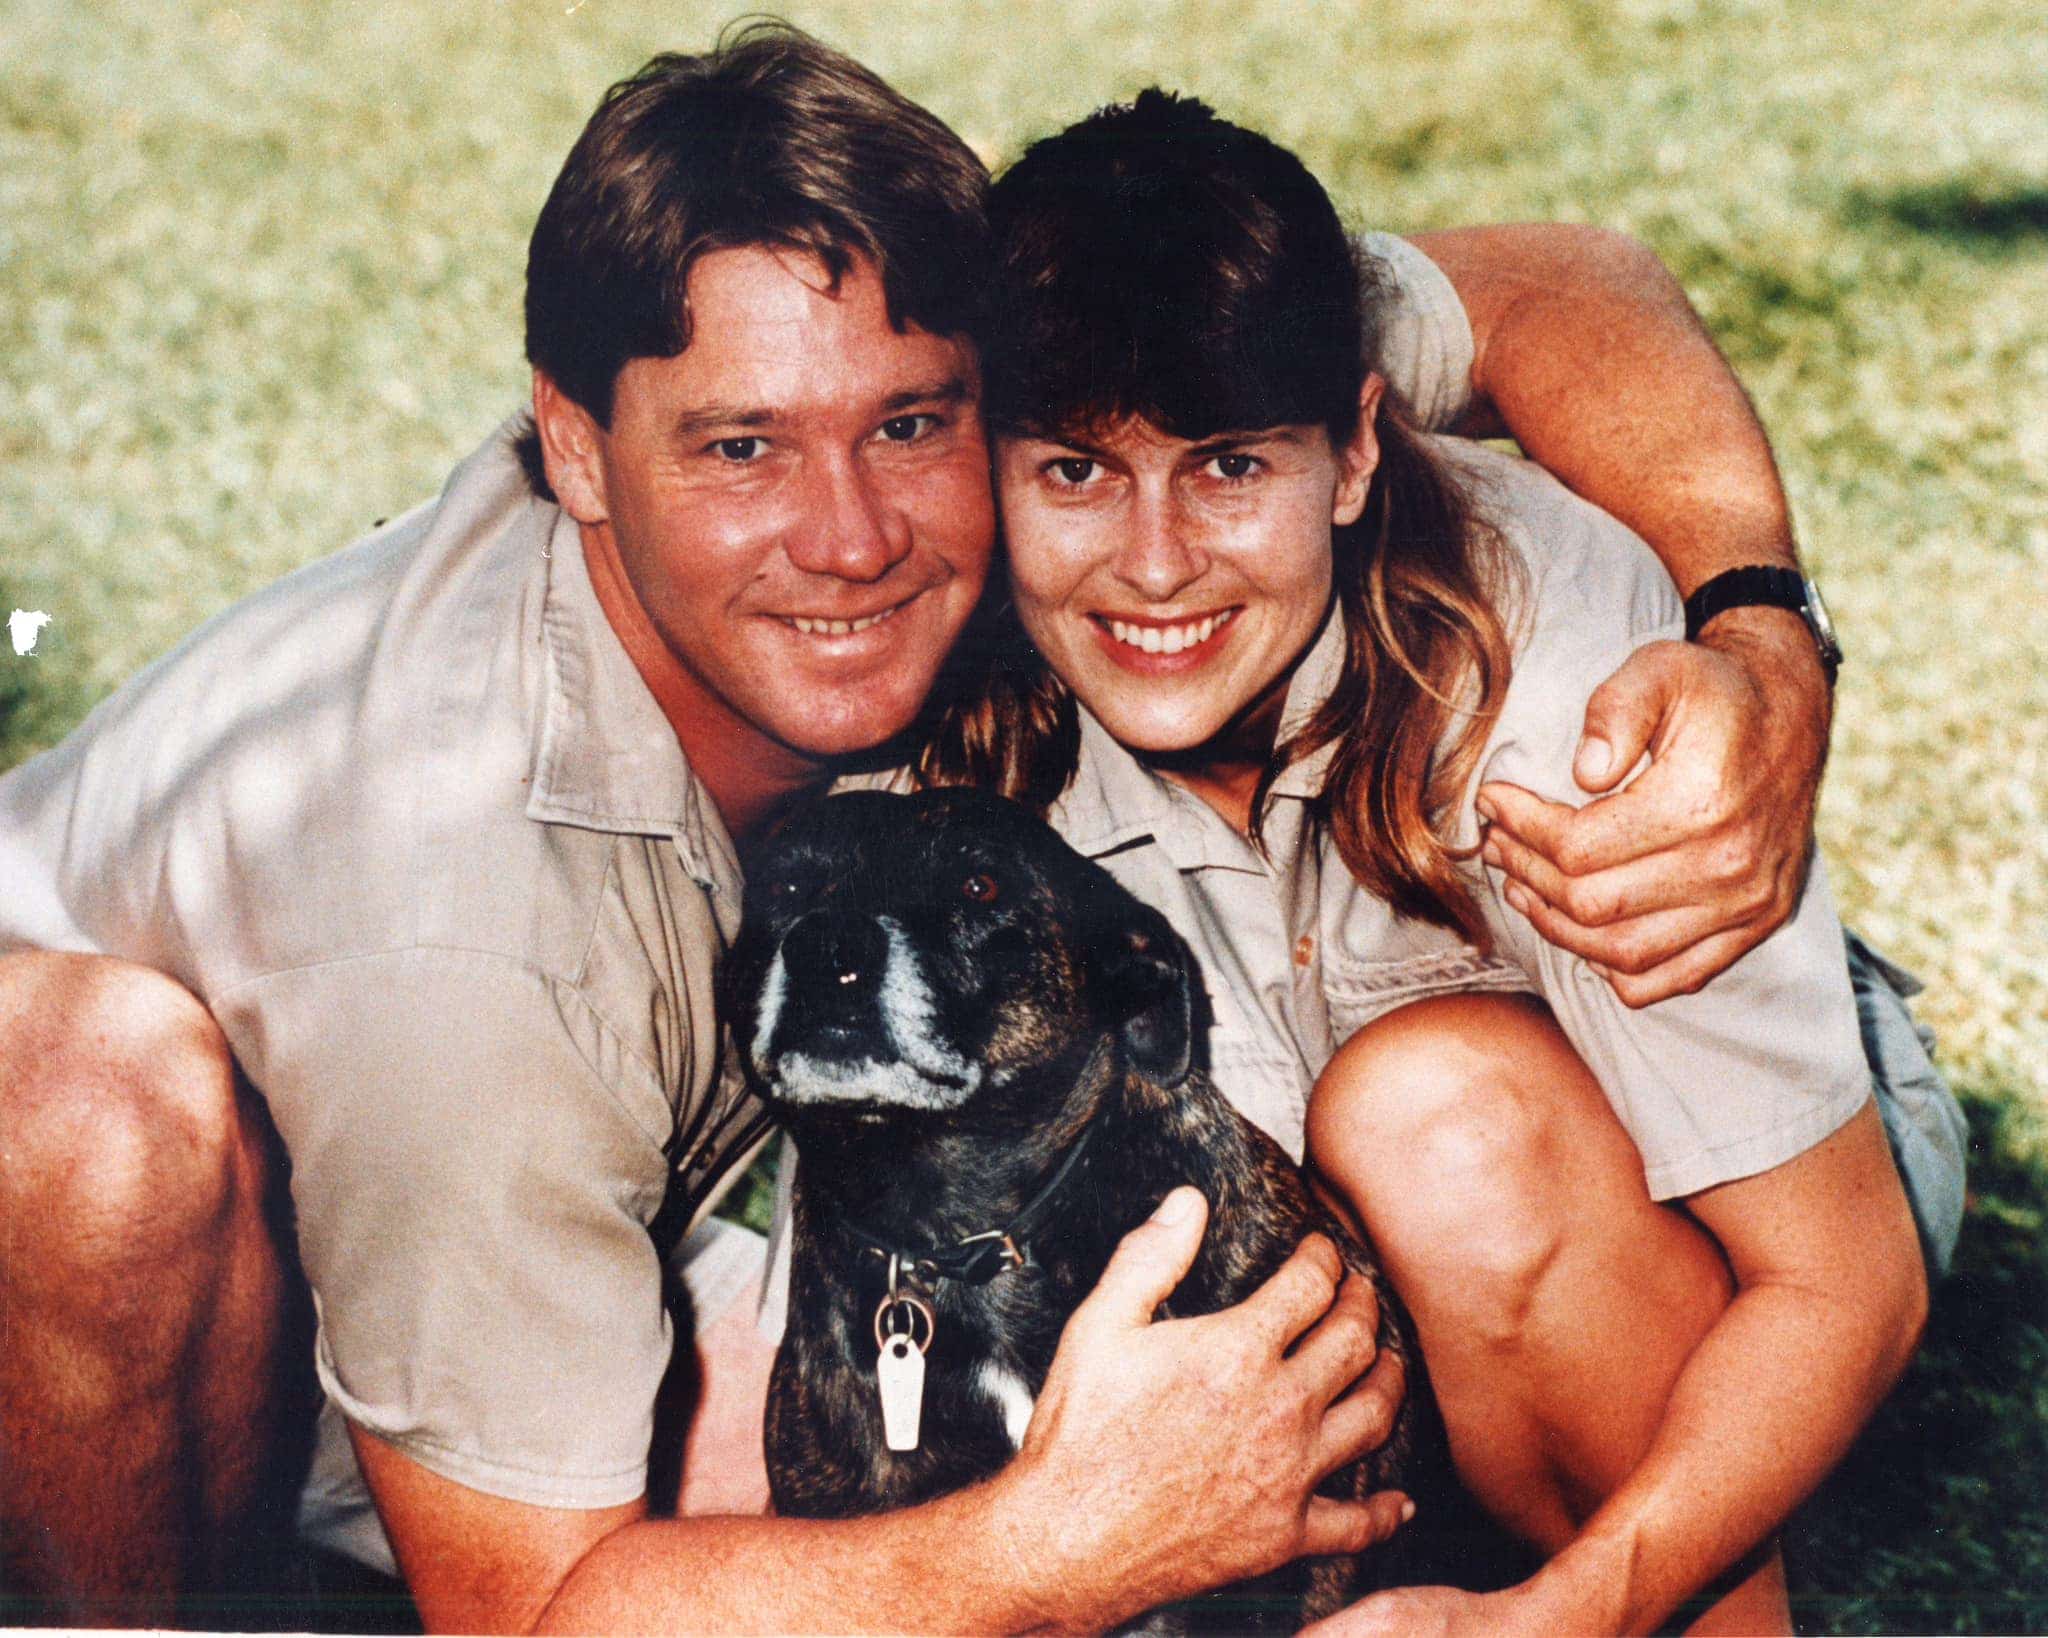 Terri Irwin pictured here with her late husband, Steve Irwin, and their dog.